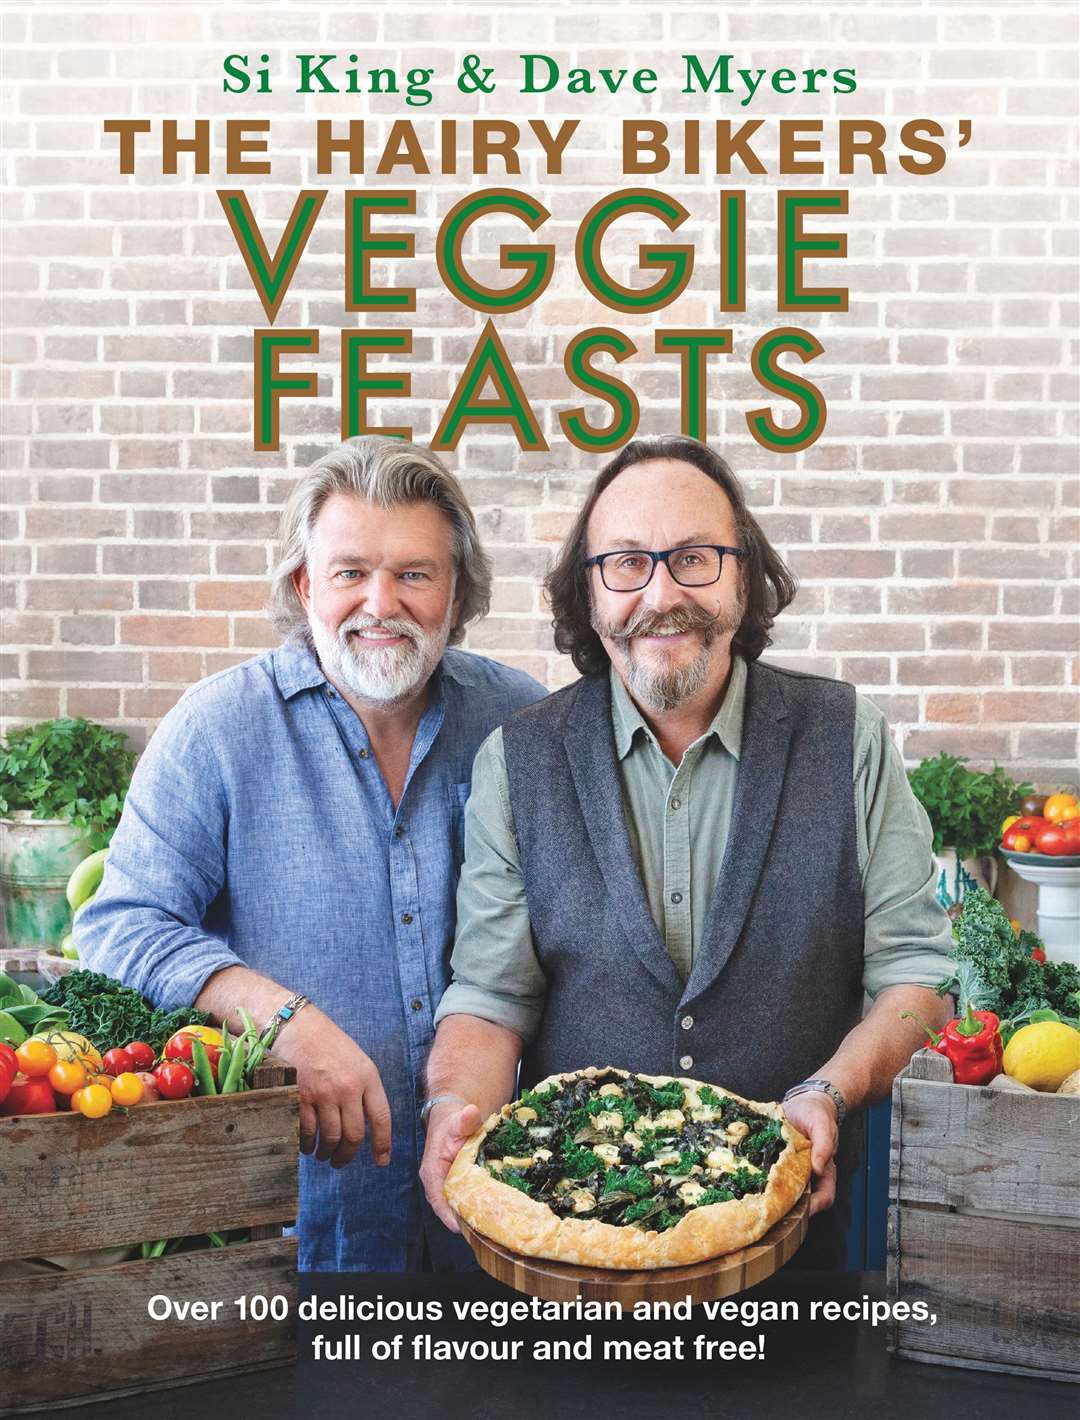 The Hairy Bikers' Veggie Feasts by Si King and Dave Myers, photography by Andrew Hayes-Watkins, published by Seven Dials, priced £22. Picture: PA Photo/Andrew Hayes-Watkins